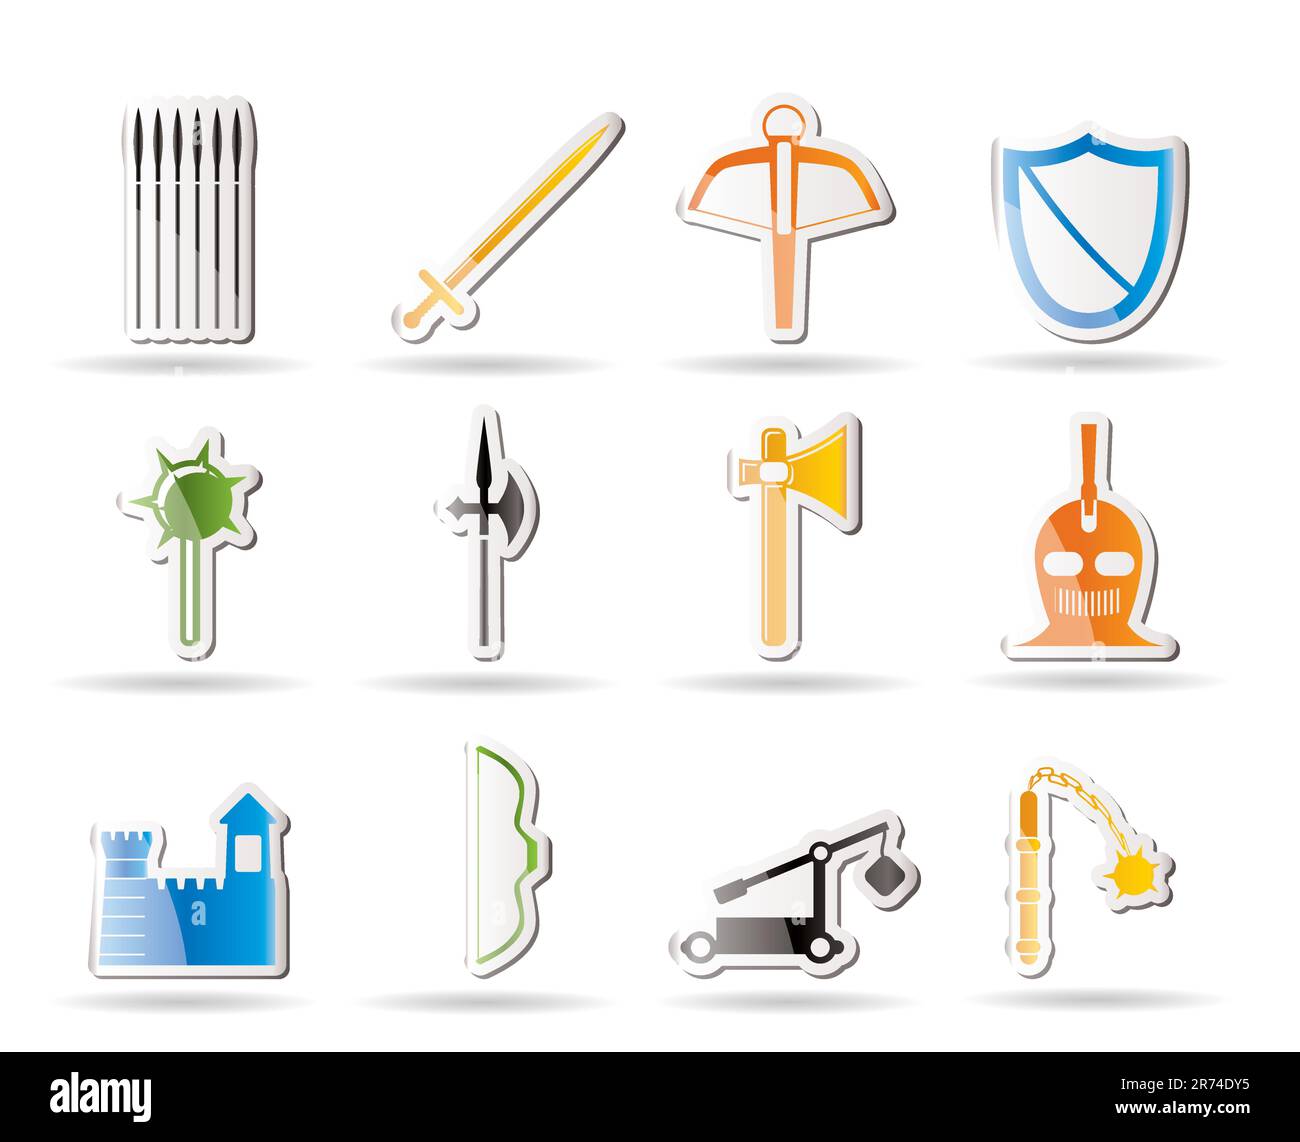 Simple medieval arms and objects icons - vector icon set Stock Vector